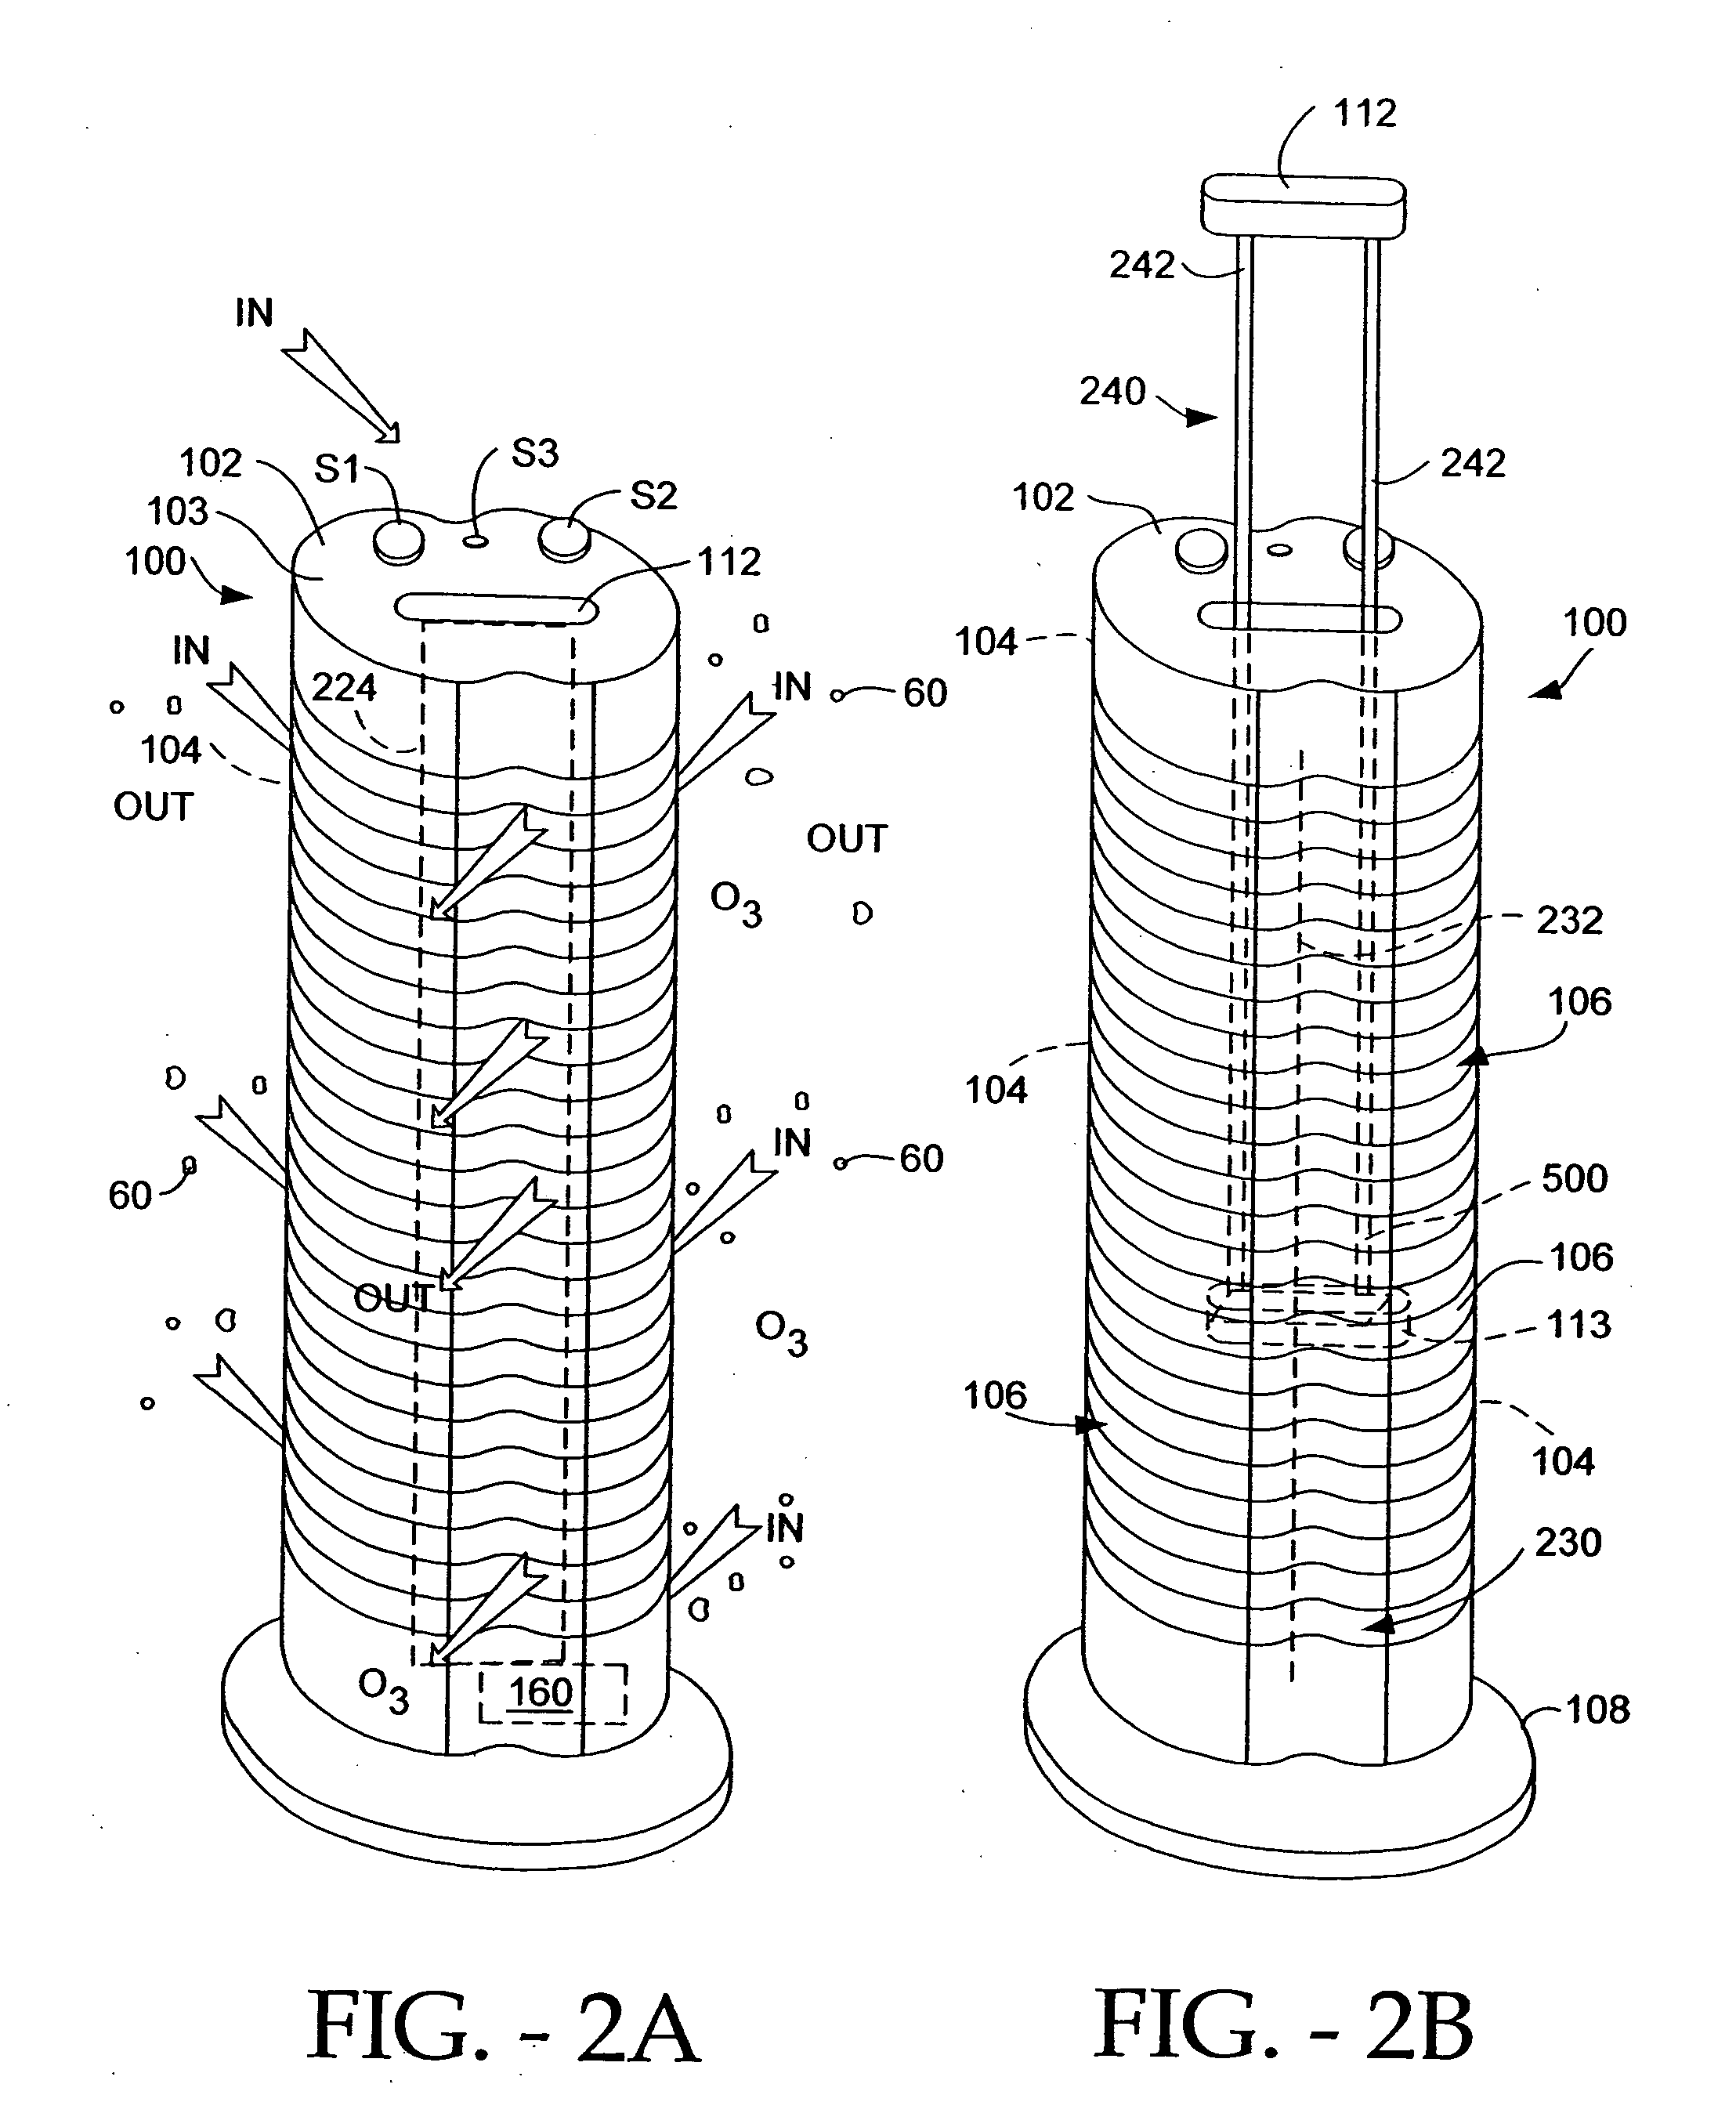 Electro-kinetic air transporter and conditioner devices with enhanced arching detection and suppression features